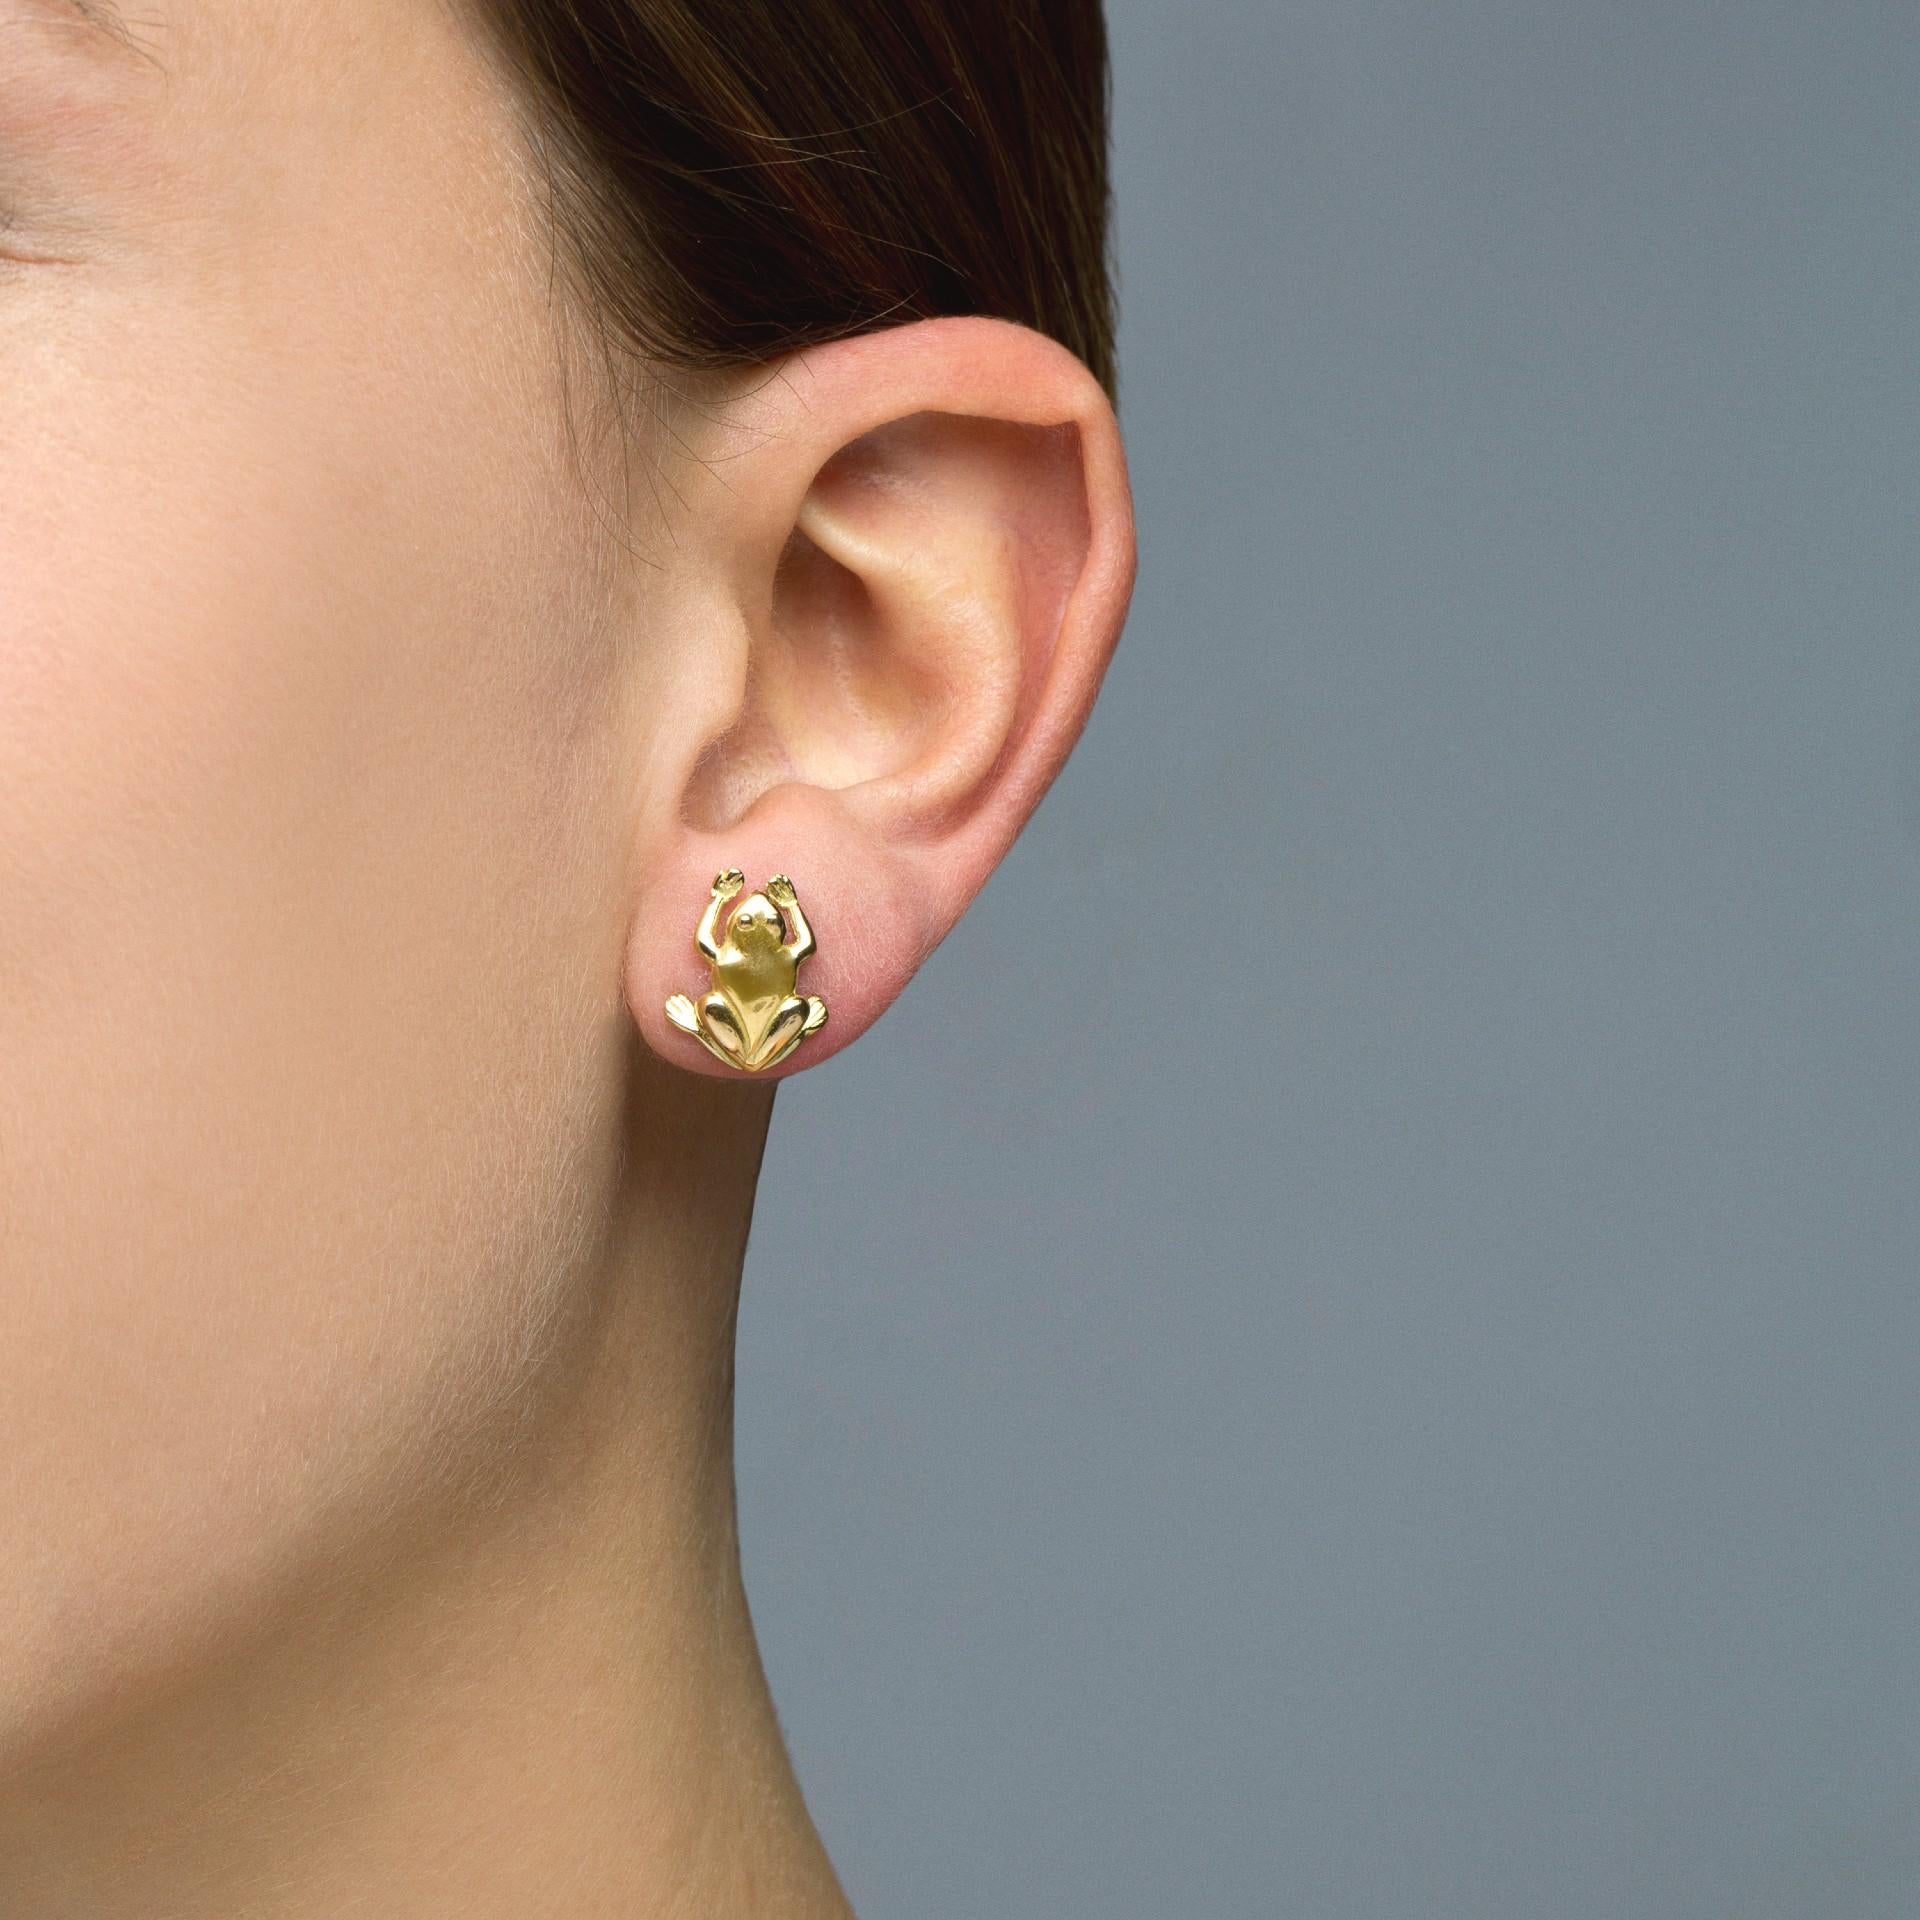 Alex Jona design collection, hand crafted in Italy, 18 karat yellow gold frog stud earrings.
Dimensions: H x 1.5 cm/0.59 in - W x 1 cm/ 0.39 in.

Alex Jona jewels stand out, not only for their special design and for the excellent quality of the